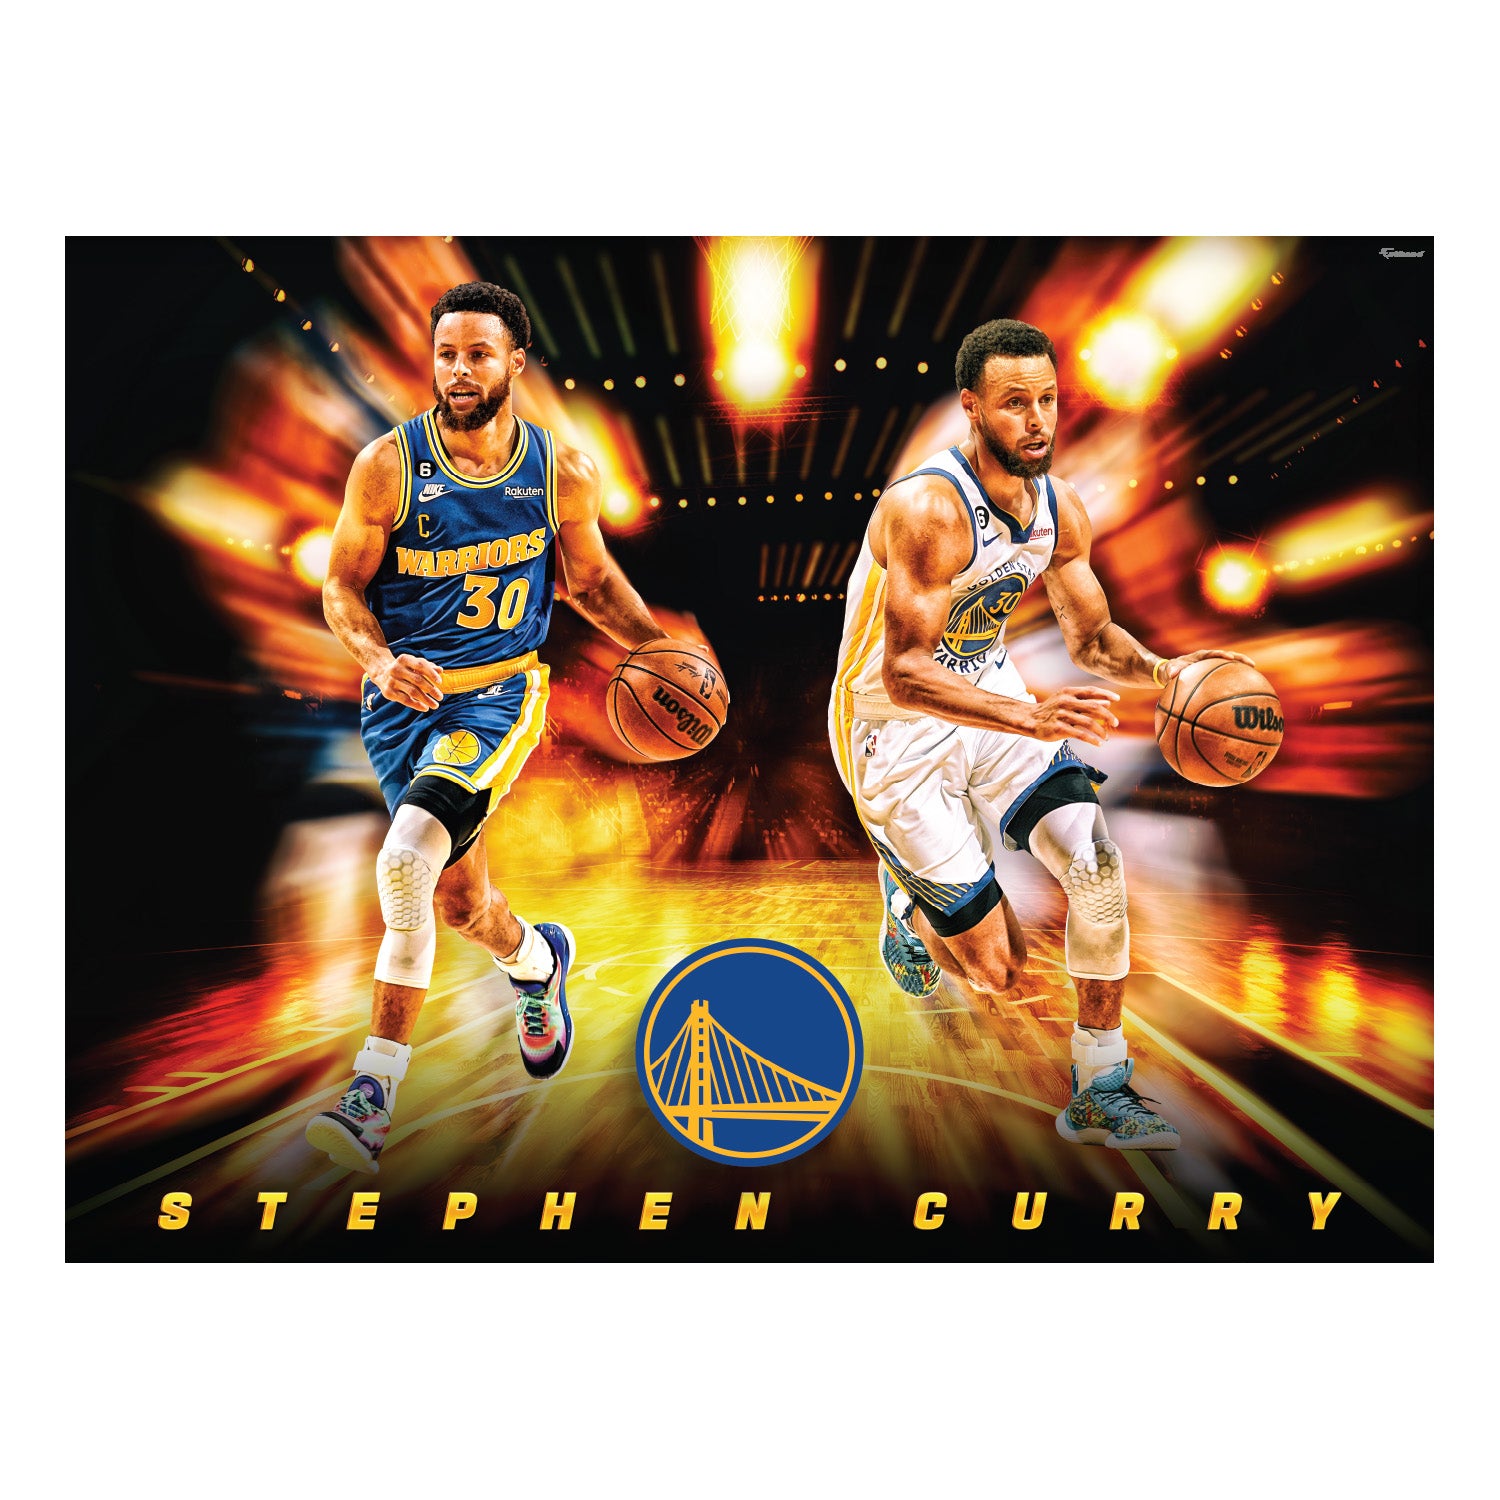 Steph Curry Jersey History | Poster